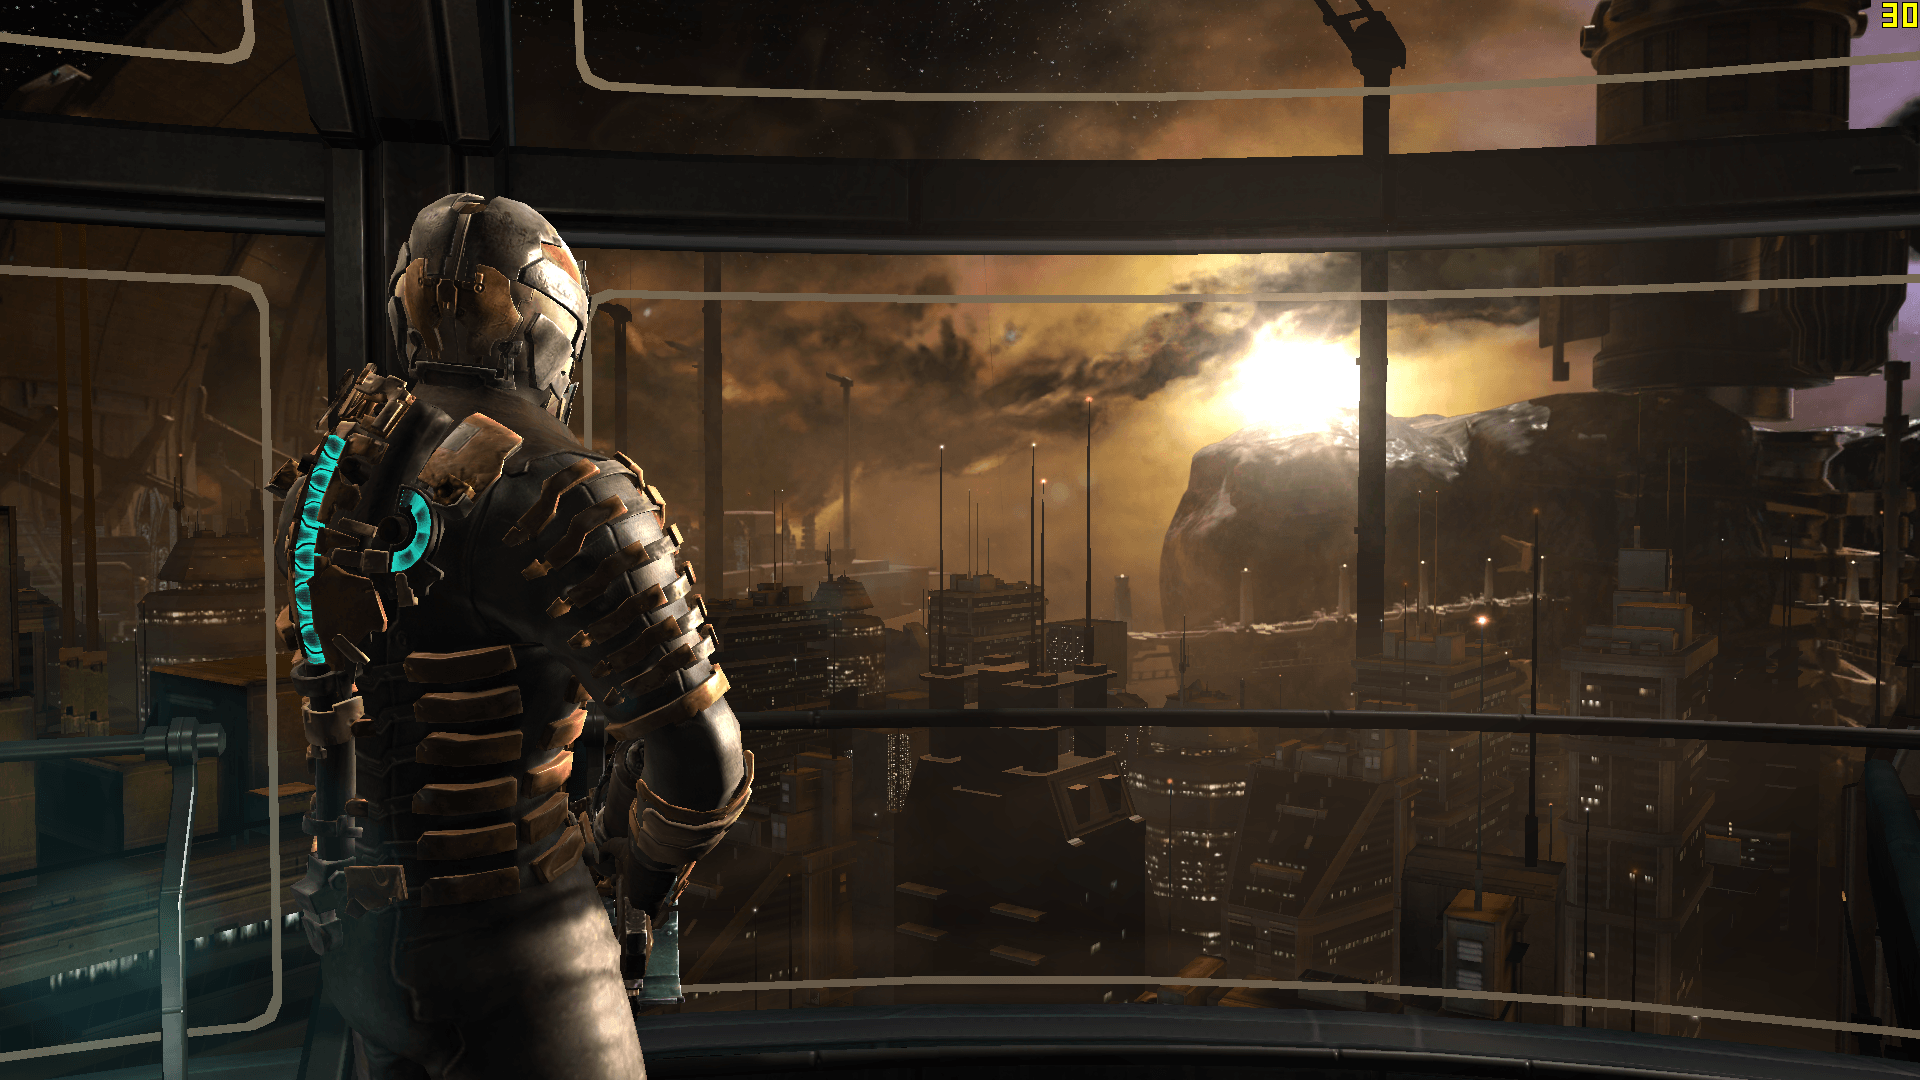 Dead Space 2 Wallpapers - Top Free Dead Space 2 Backgrounds